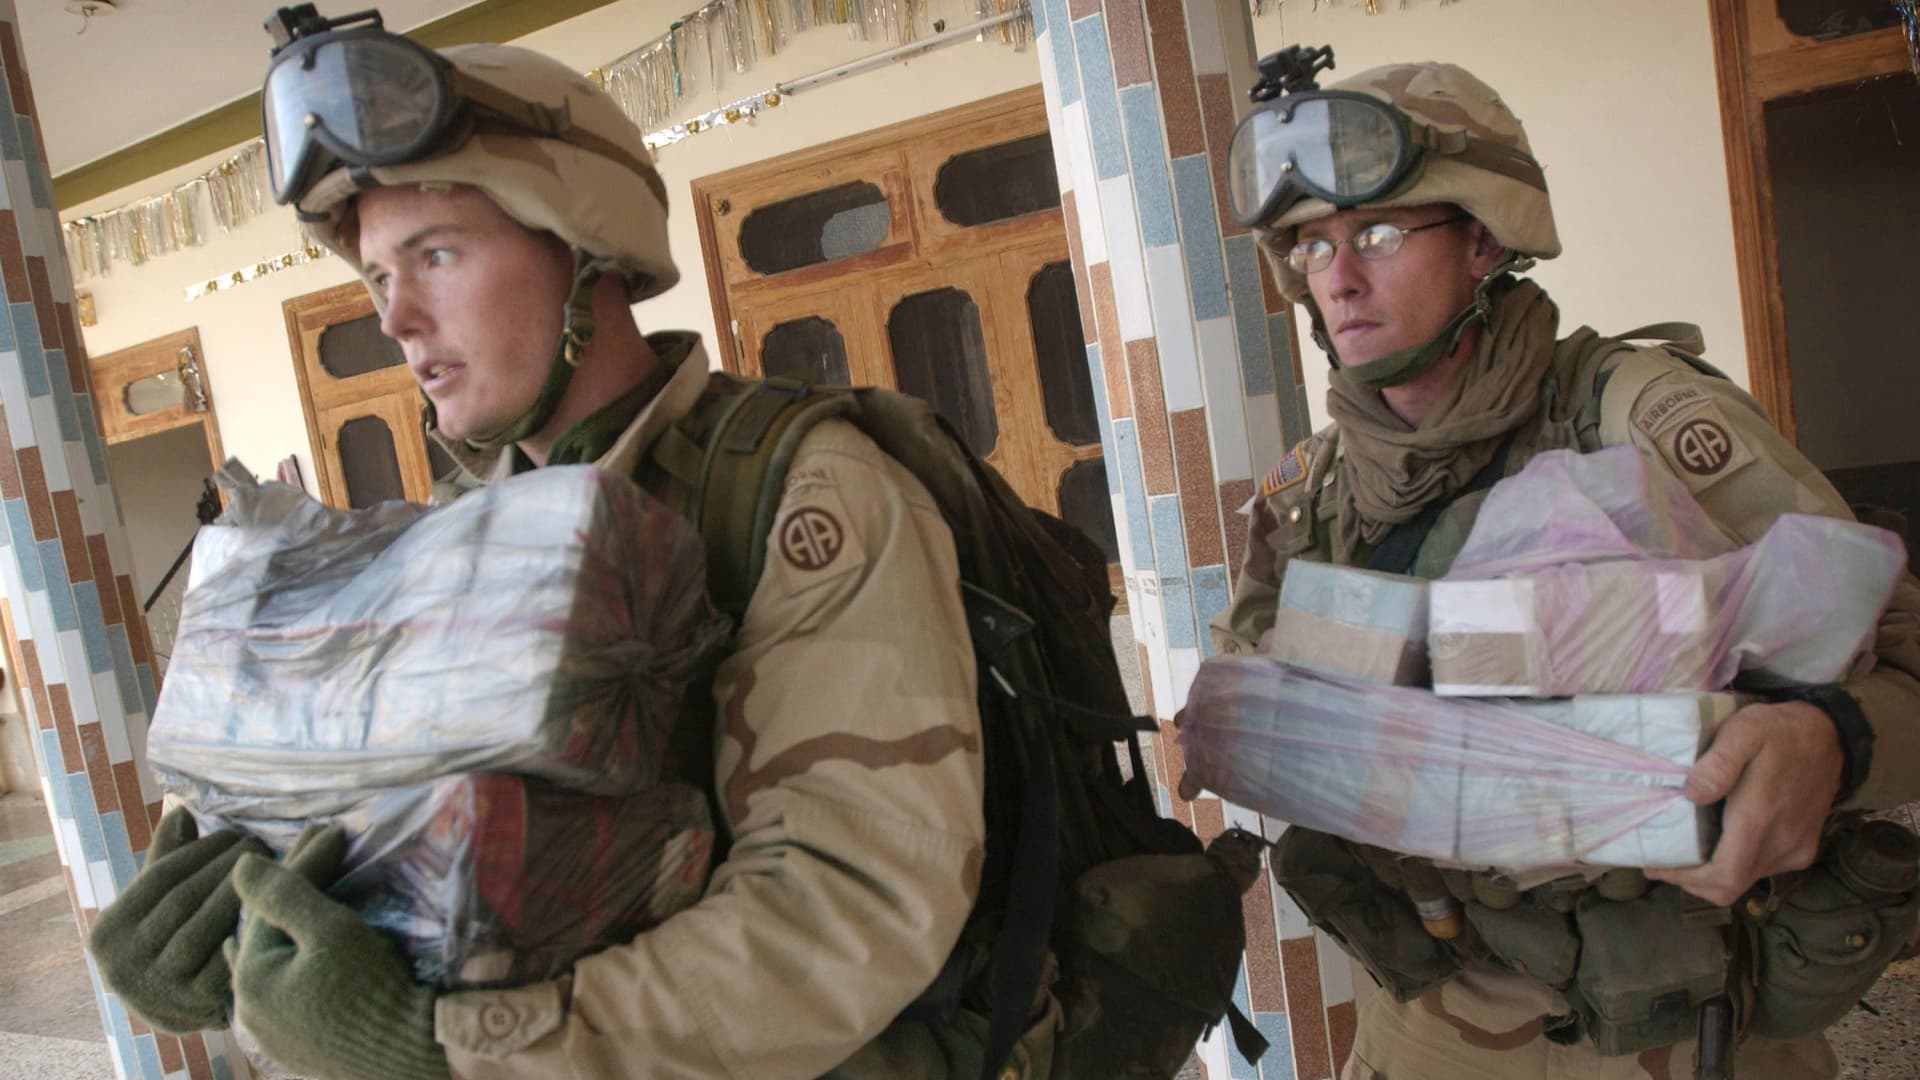 Members of the 82nd Airborne Division carry thousands of dollars in Afghani money found hidden away during an early-morning raid October 1, 2002 in an undisclosed location, in southeastern Afghanistan.